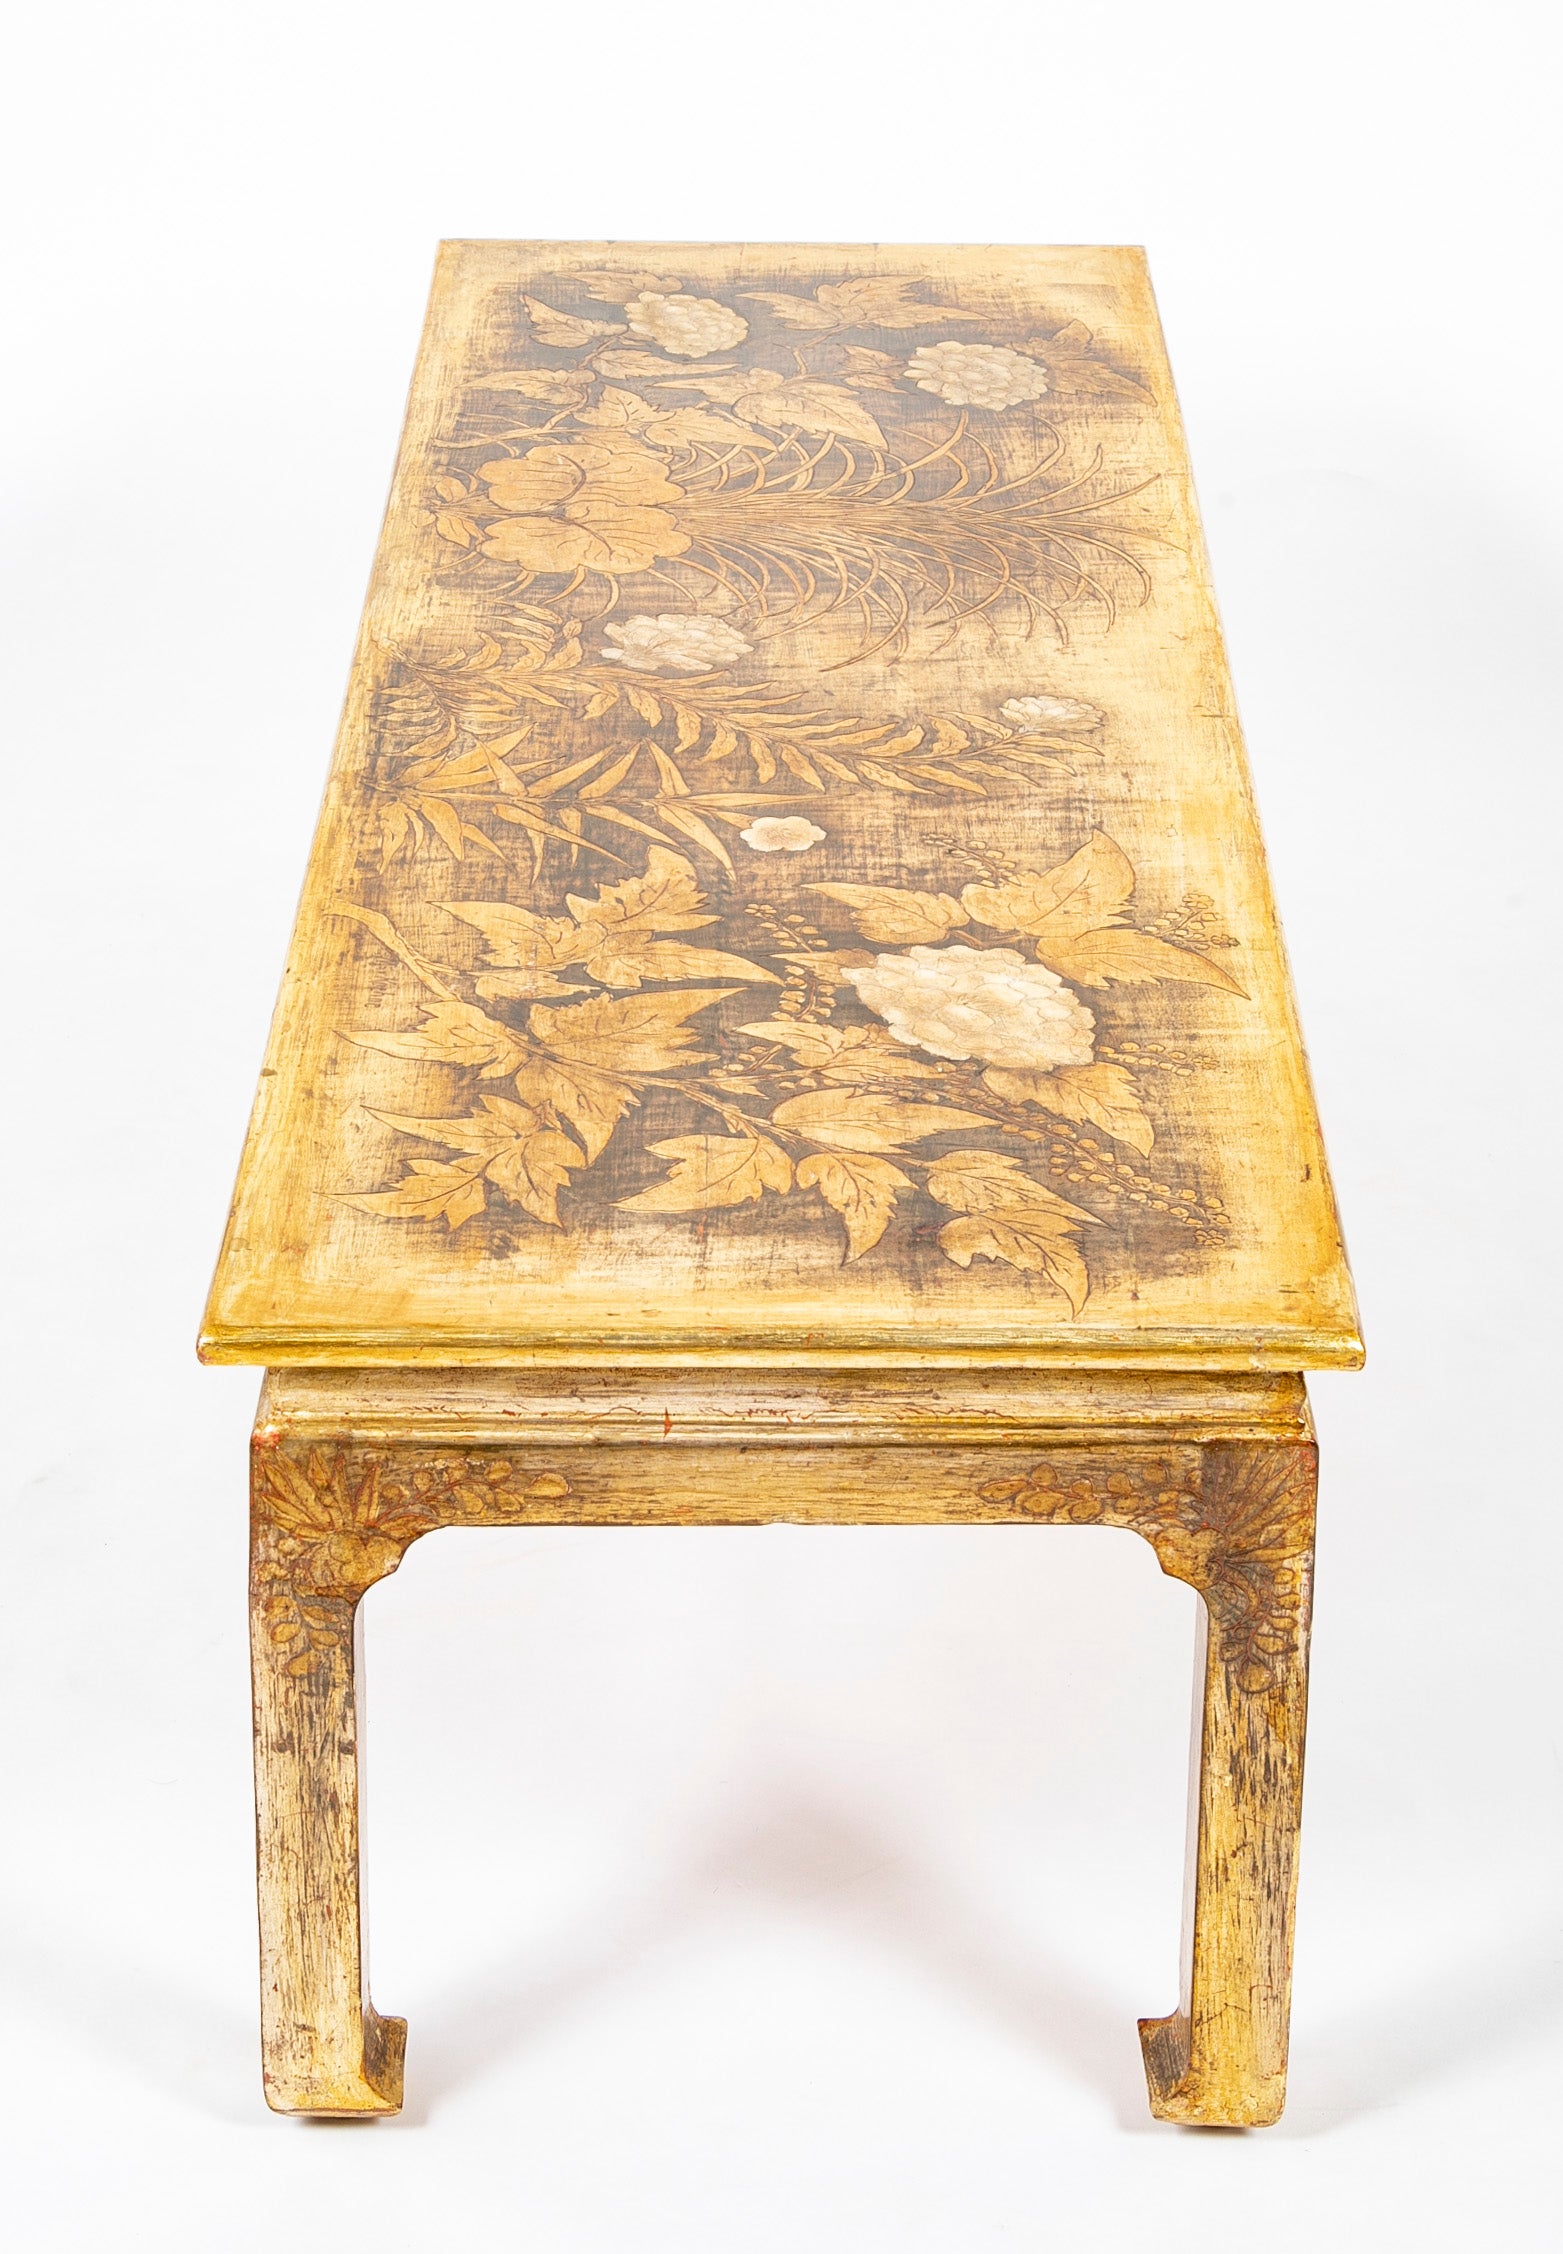 Max Kuehne Carved and Incised Wood Low Table with Gilt & Polycrhome Gessoed Top